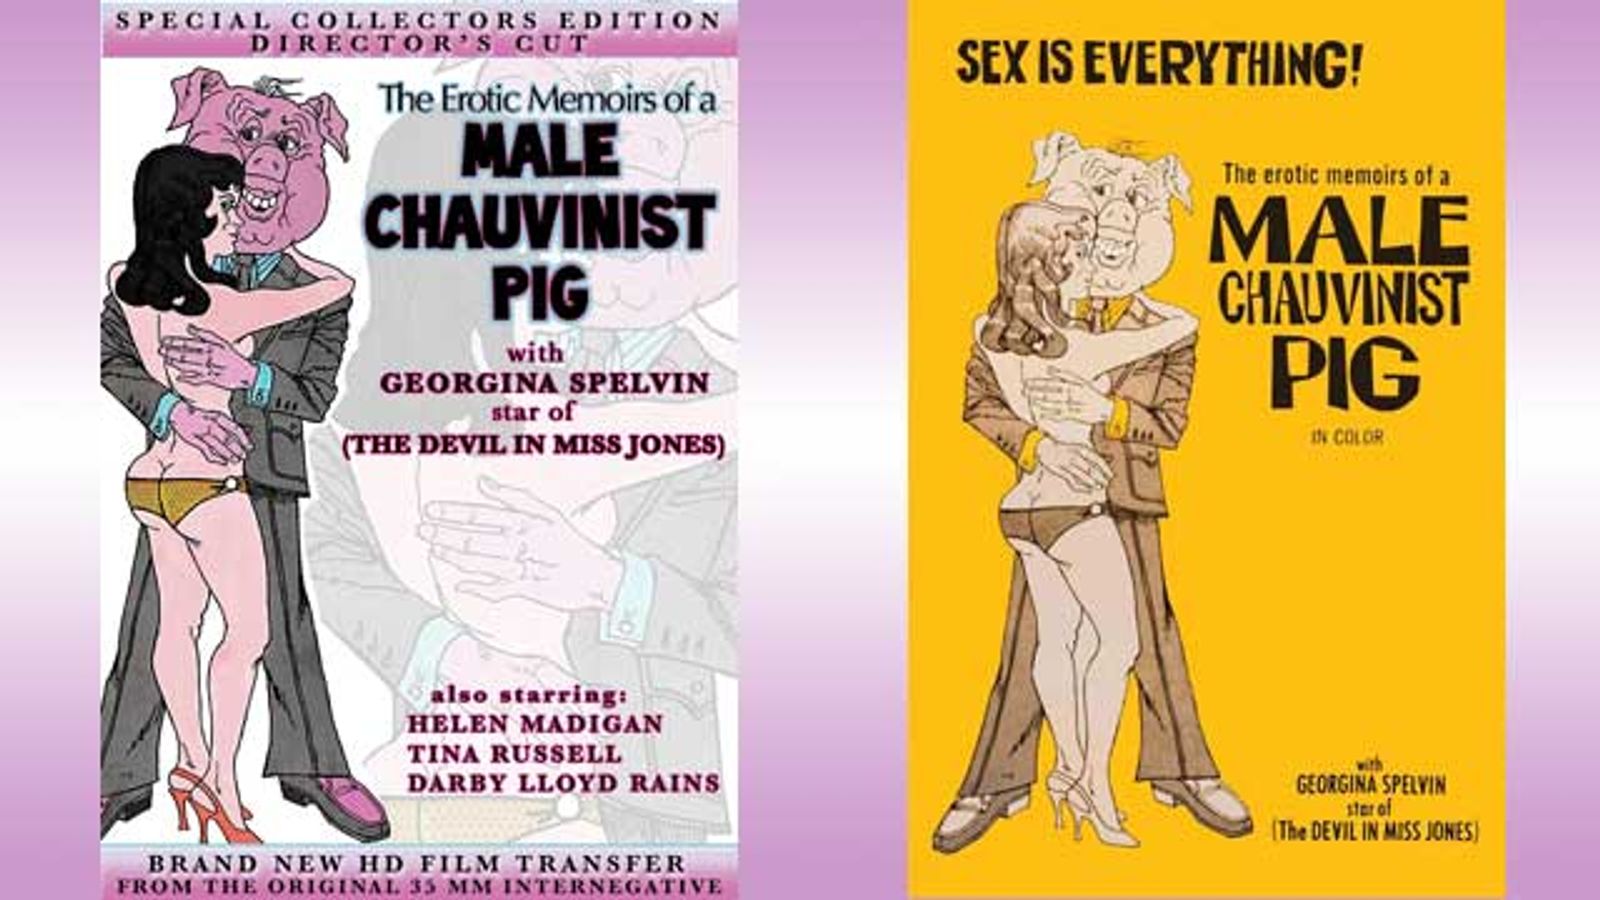 Are You Ready for 'The Erotic Memoirs Of A Male Chauvinist Pig'?